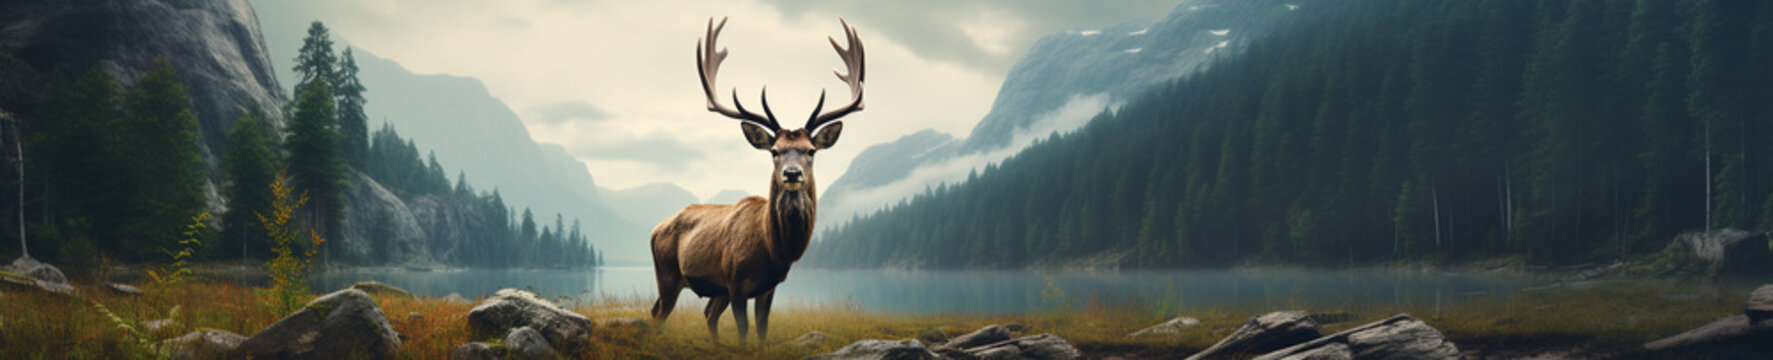 A Banner Photo of a Deer in Nature